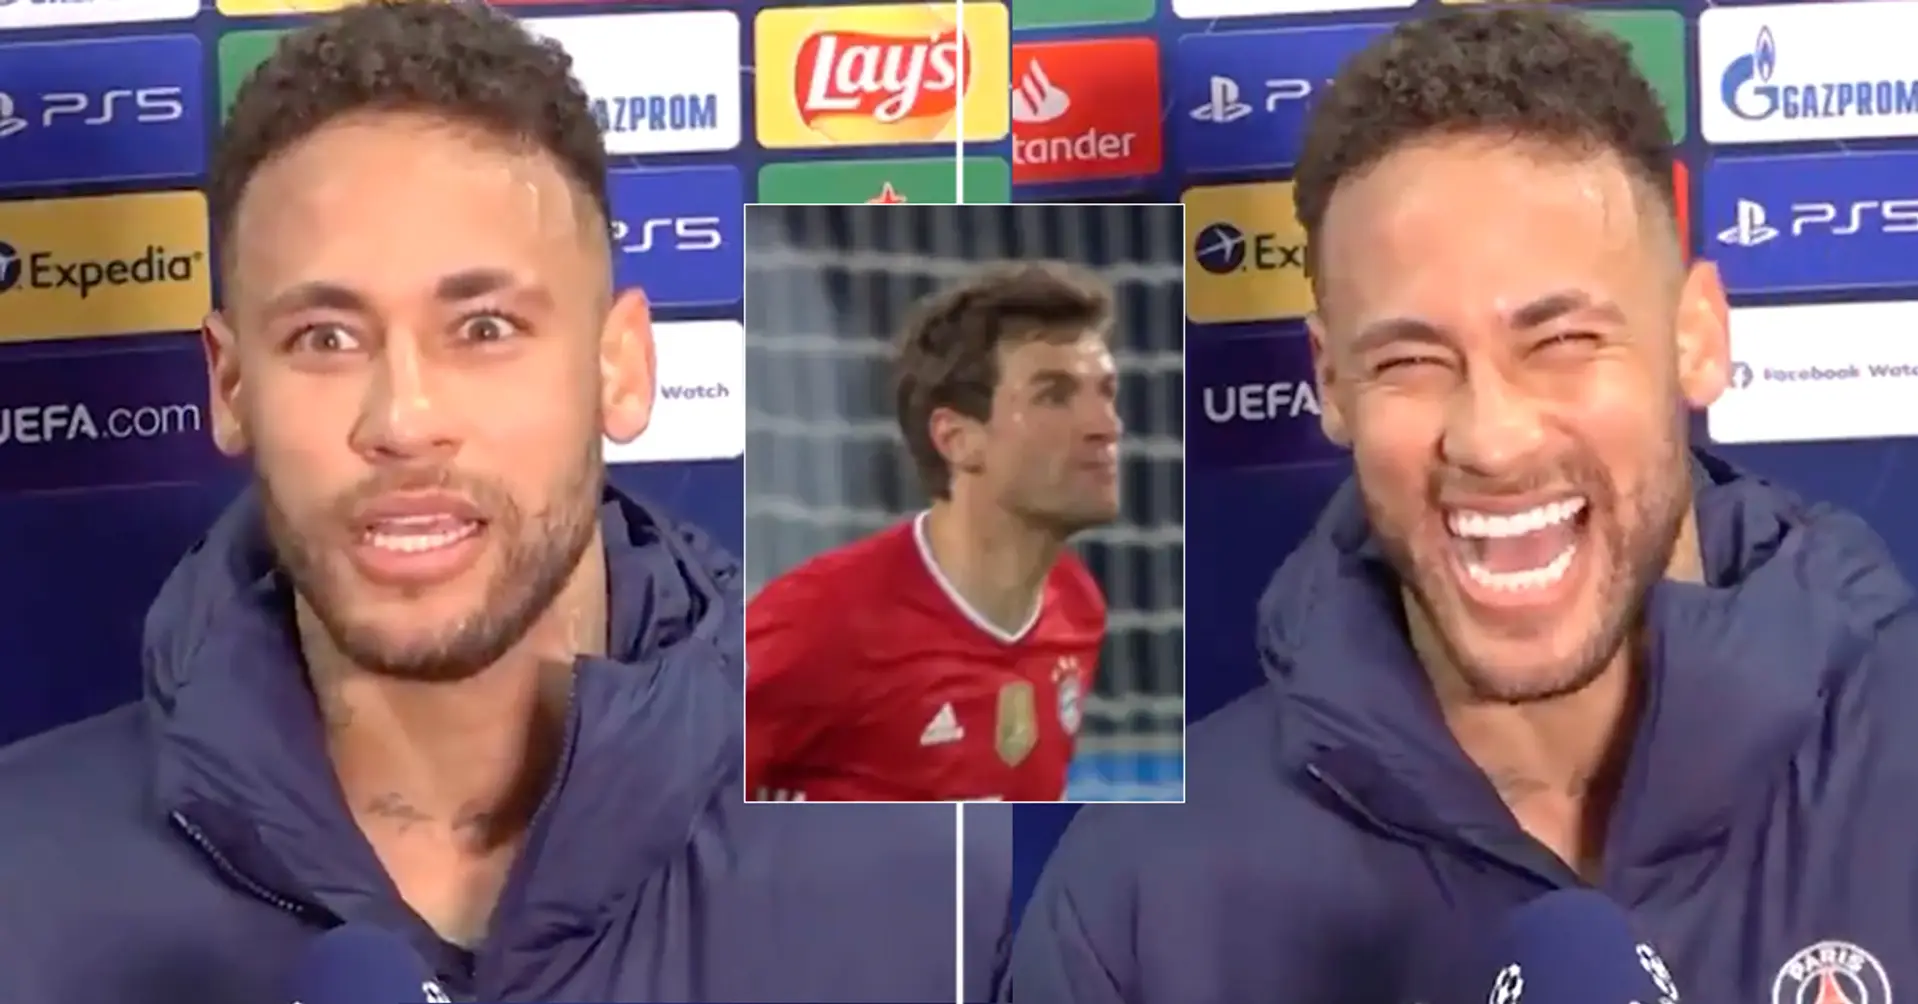 Neymar trolls Bayern after match: 'You can flirt with a girl the whole night. Then another guy wins her over in 5 minutes'